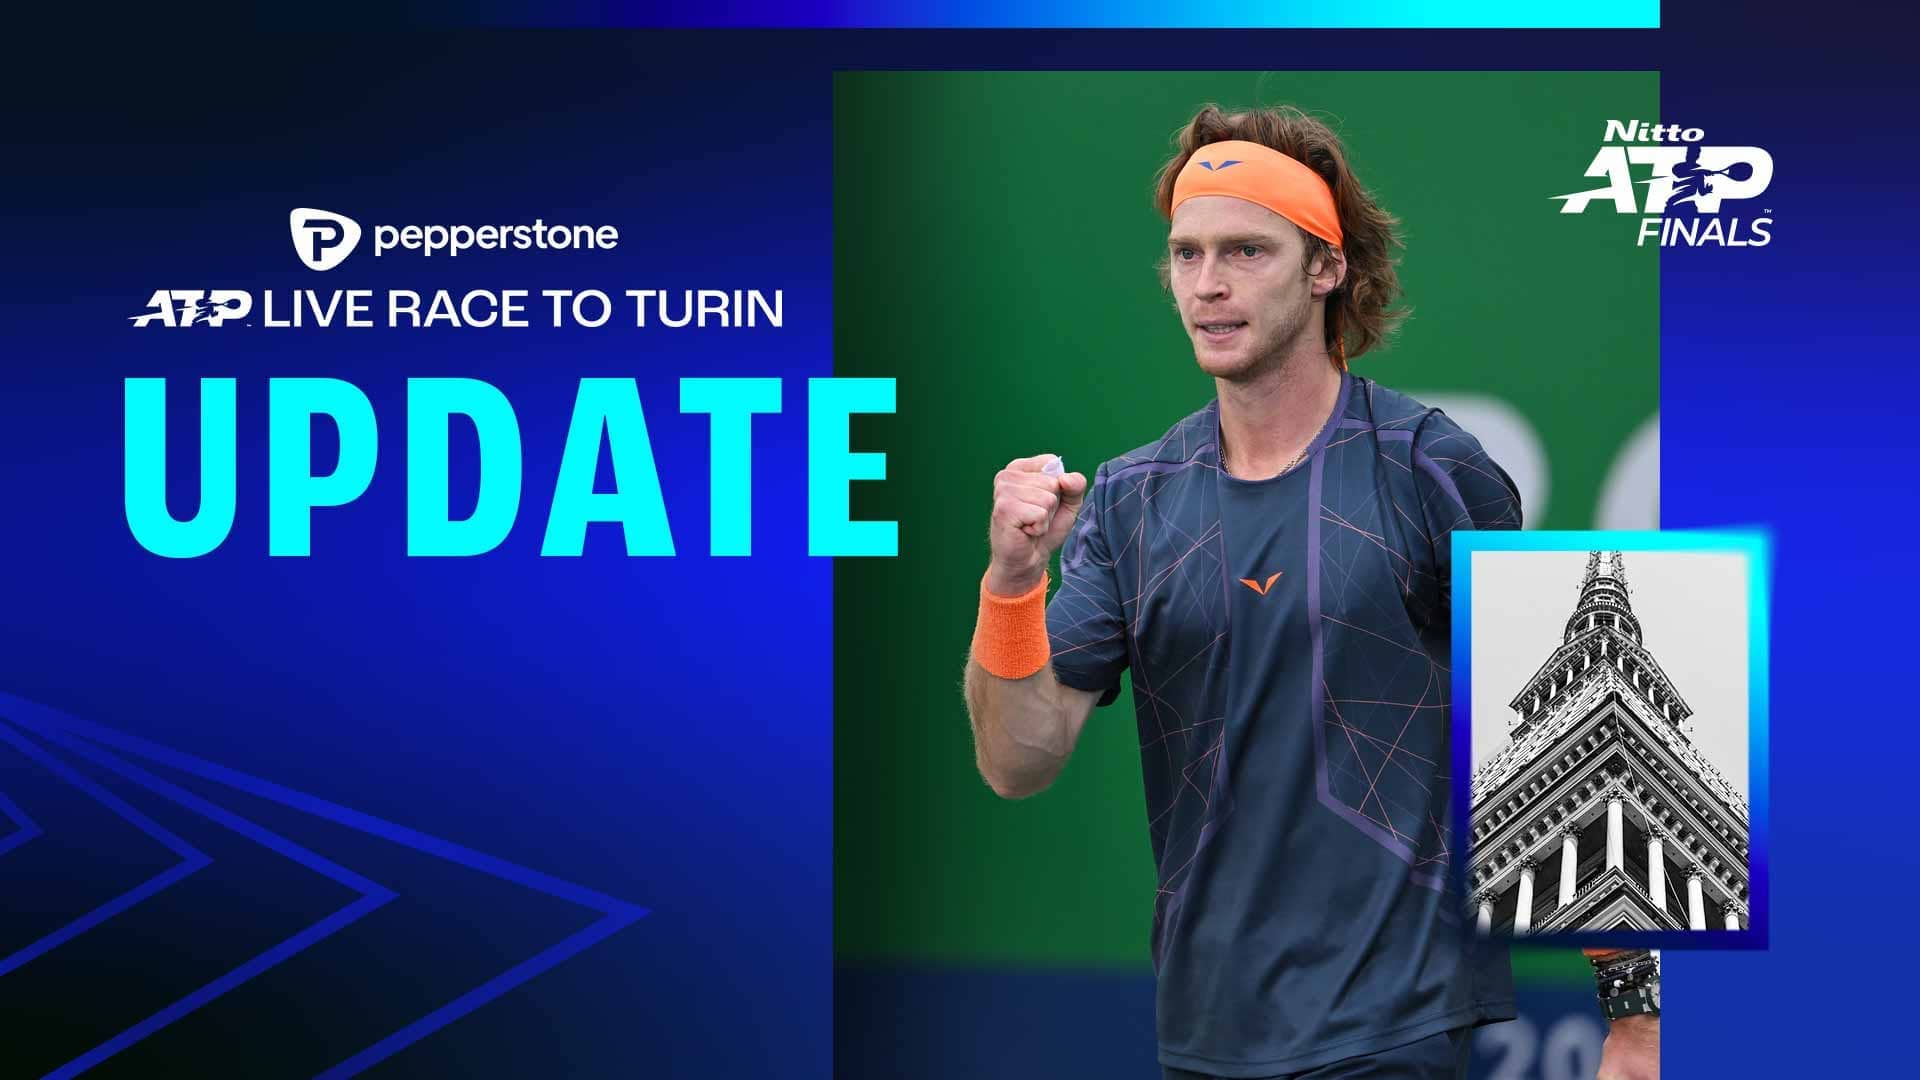 Andrey Rublev is trying to qualify for the Nitto ATP Finals for the fourth time.